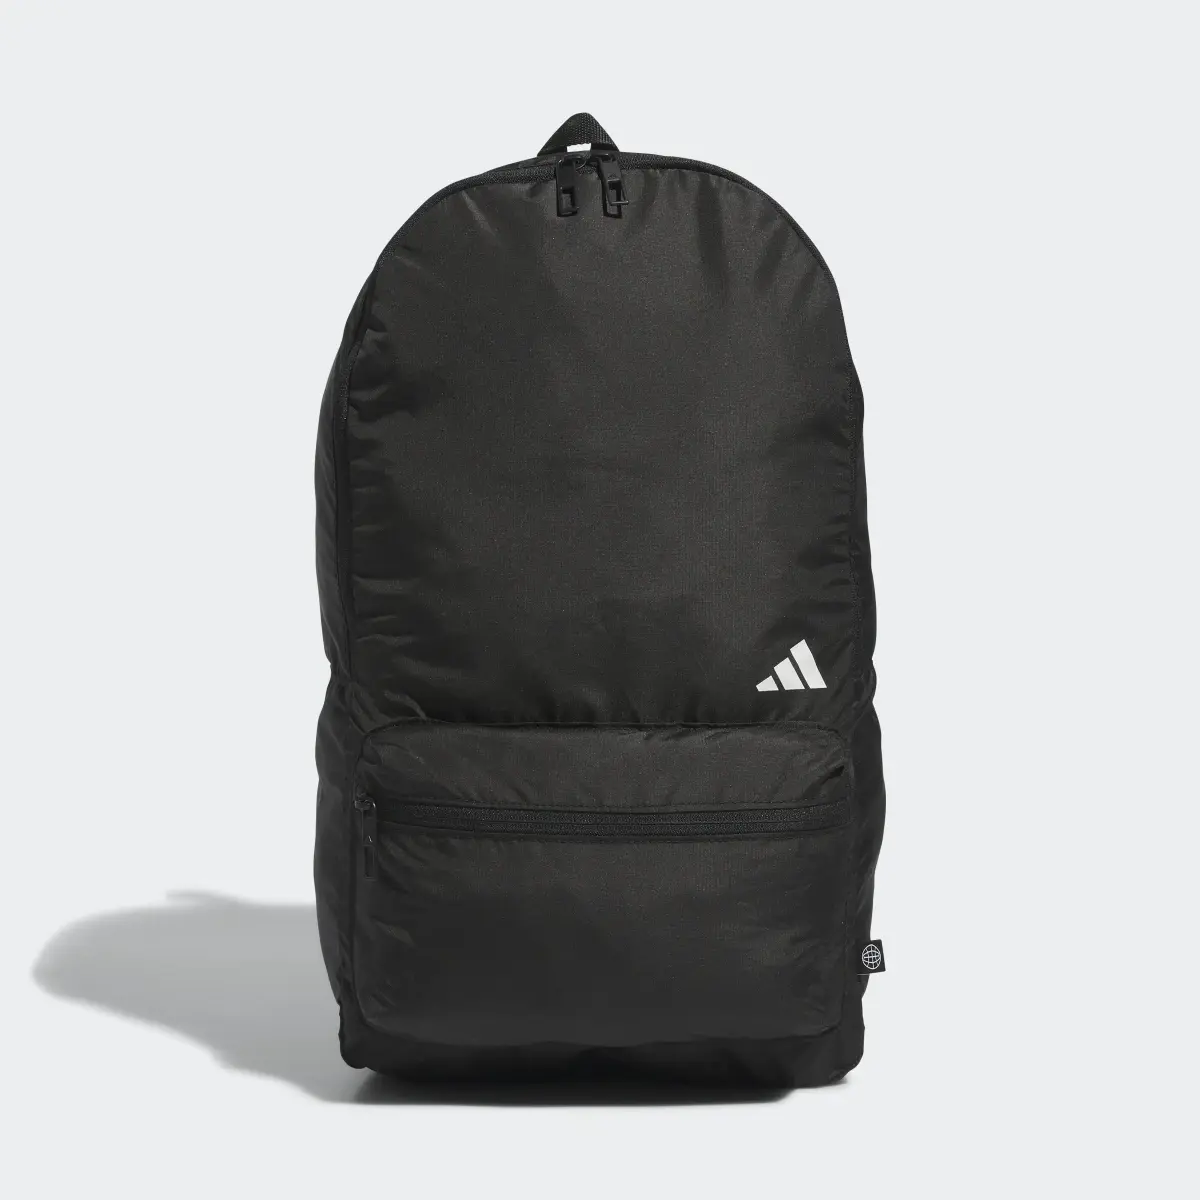 Adidas Golf Packable Backpack. 2